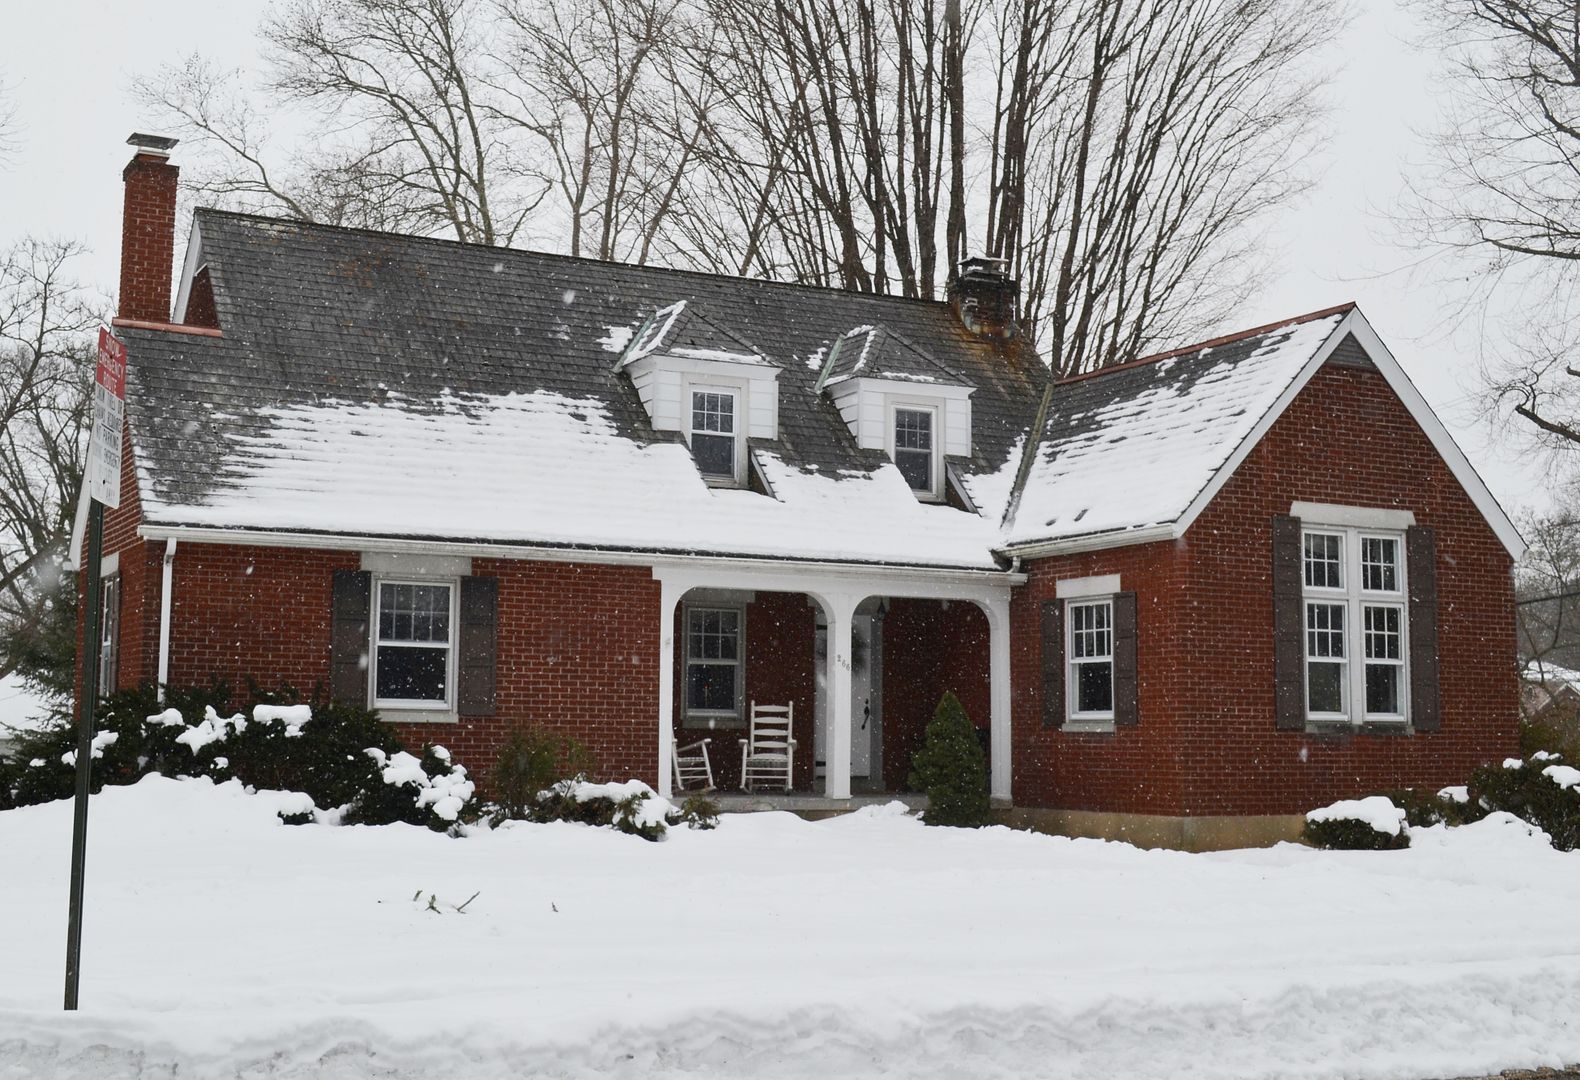 This demonstrates passion for old houses! Jennifer went out in the snow on Sunday to get good photos of this lovely old Sears kit home!